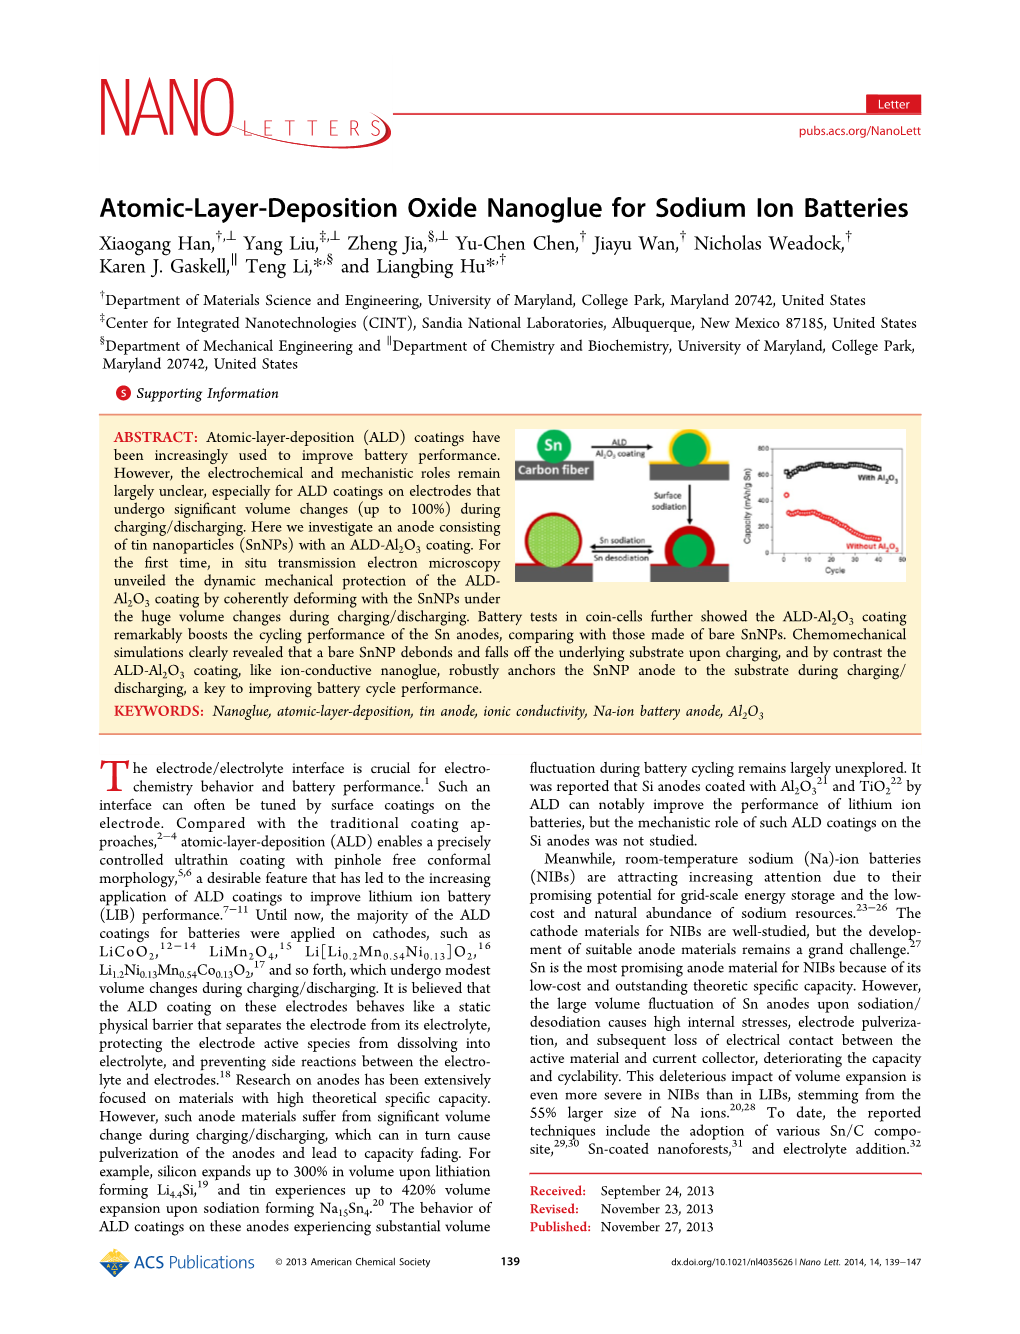 Atomic-Layer-Deposition Oxide Nano-Glue for Sodium Ion Batteries